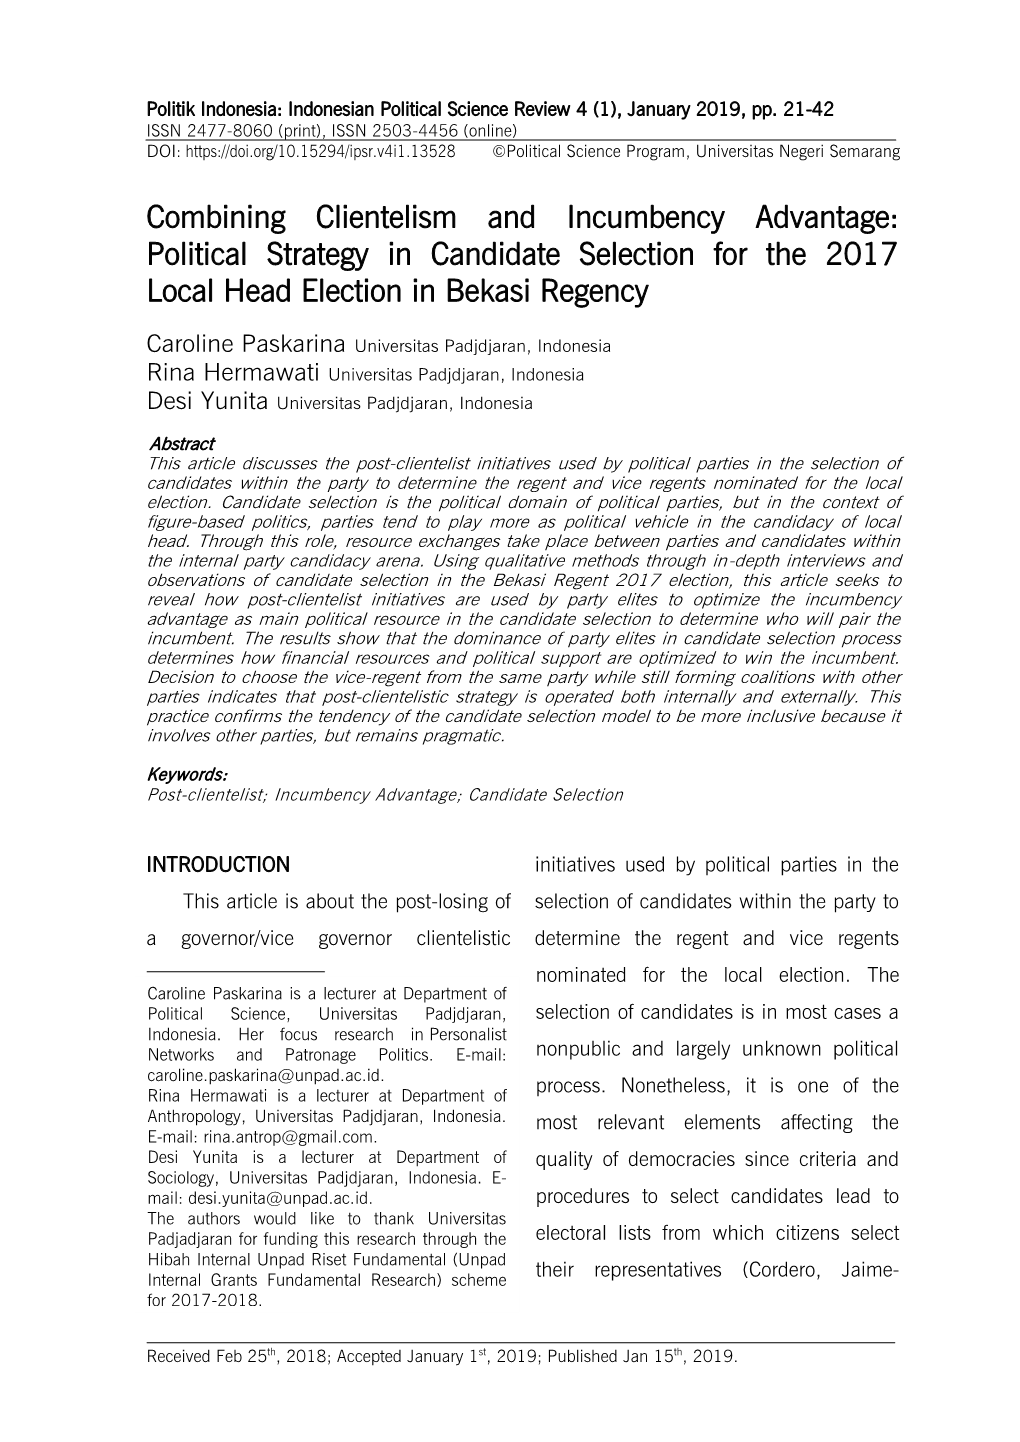 Combining Clientelism and Incumbency Advantage: Political Strategy in Candidate Selection for the 2017 Local Head Election in Bekasi Regency